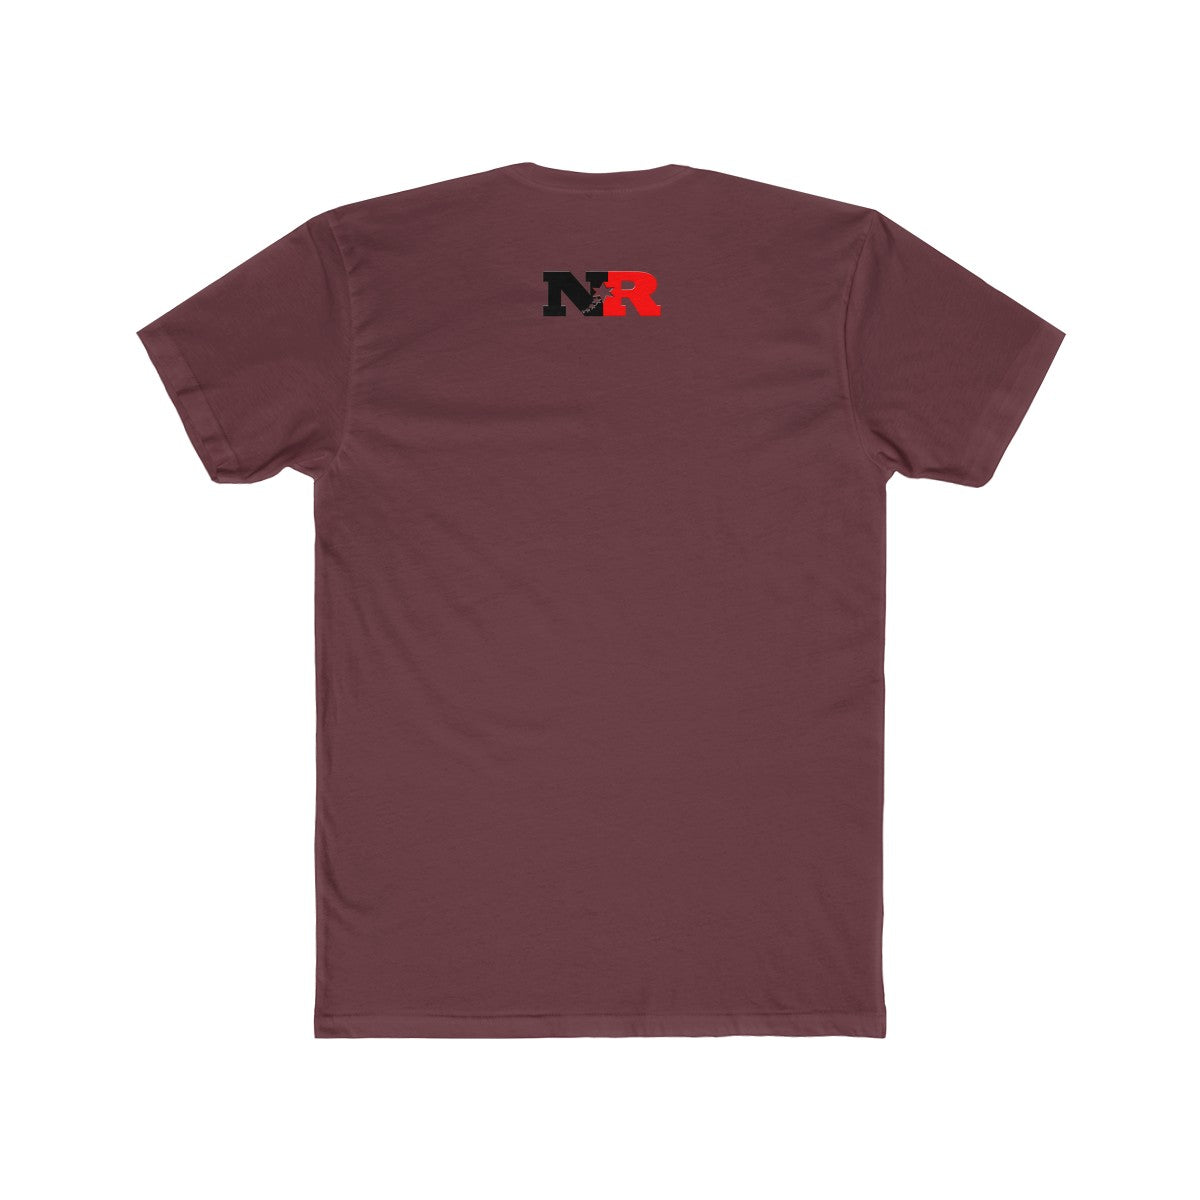 Men's Cotton Crew Tee - There is Only One Race